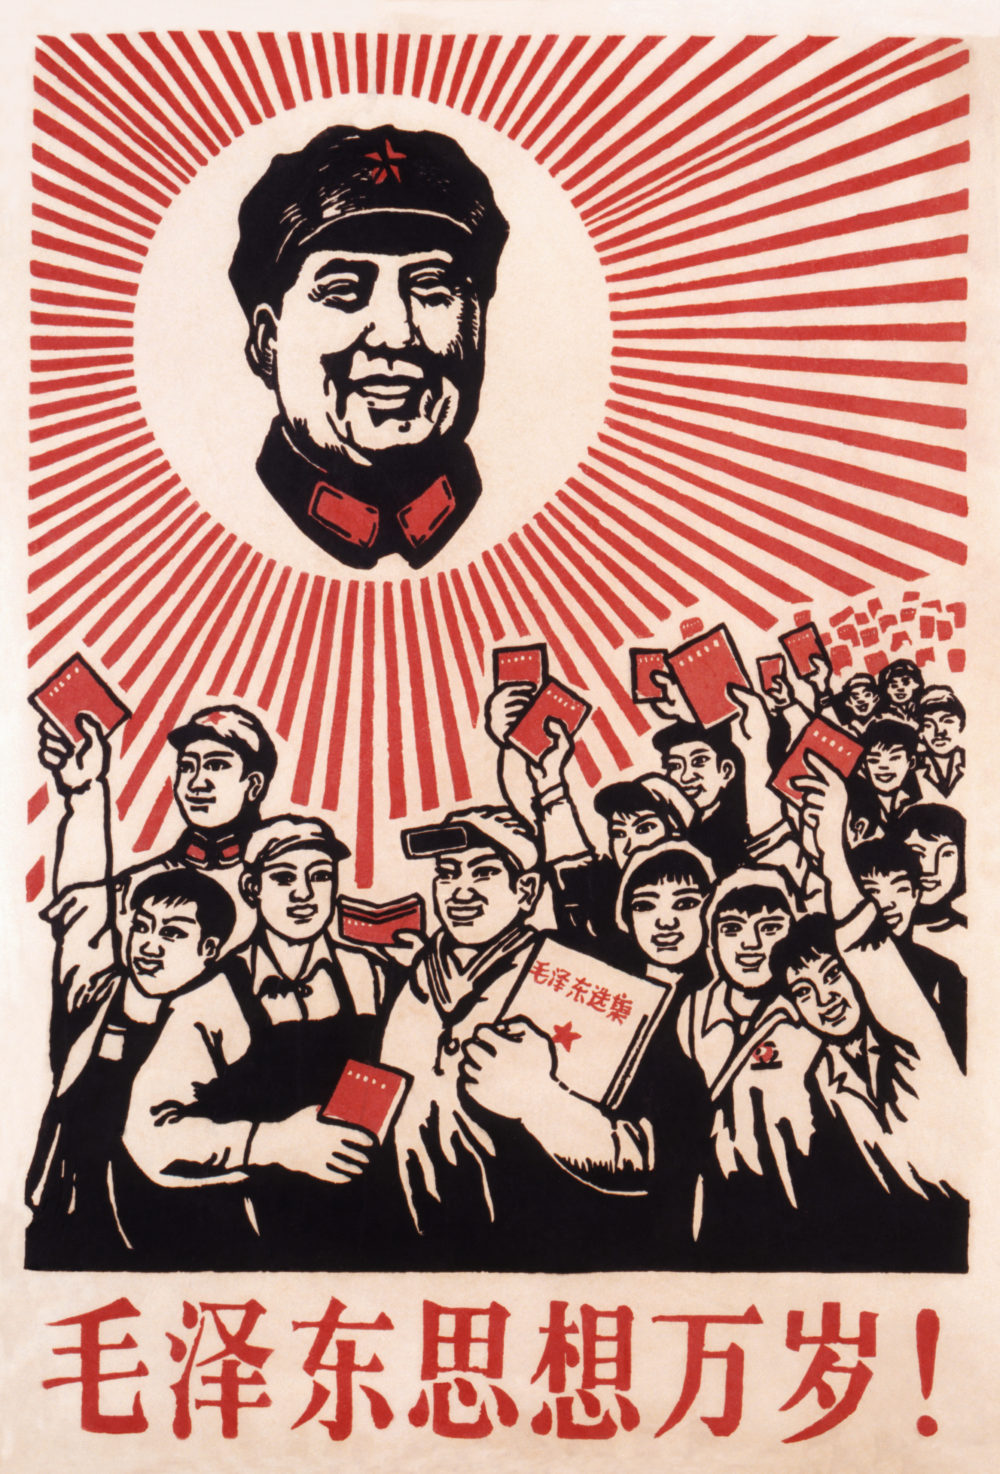 A Chinese Communist Party poster featuring  Chairman Mao and revolutionaries